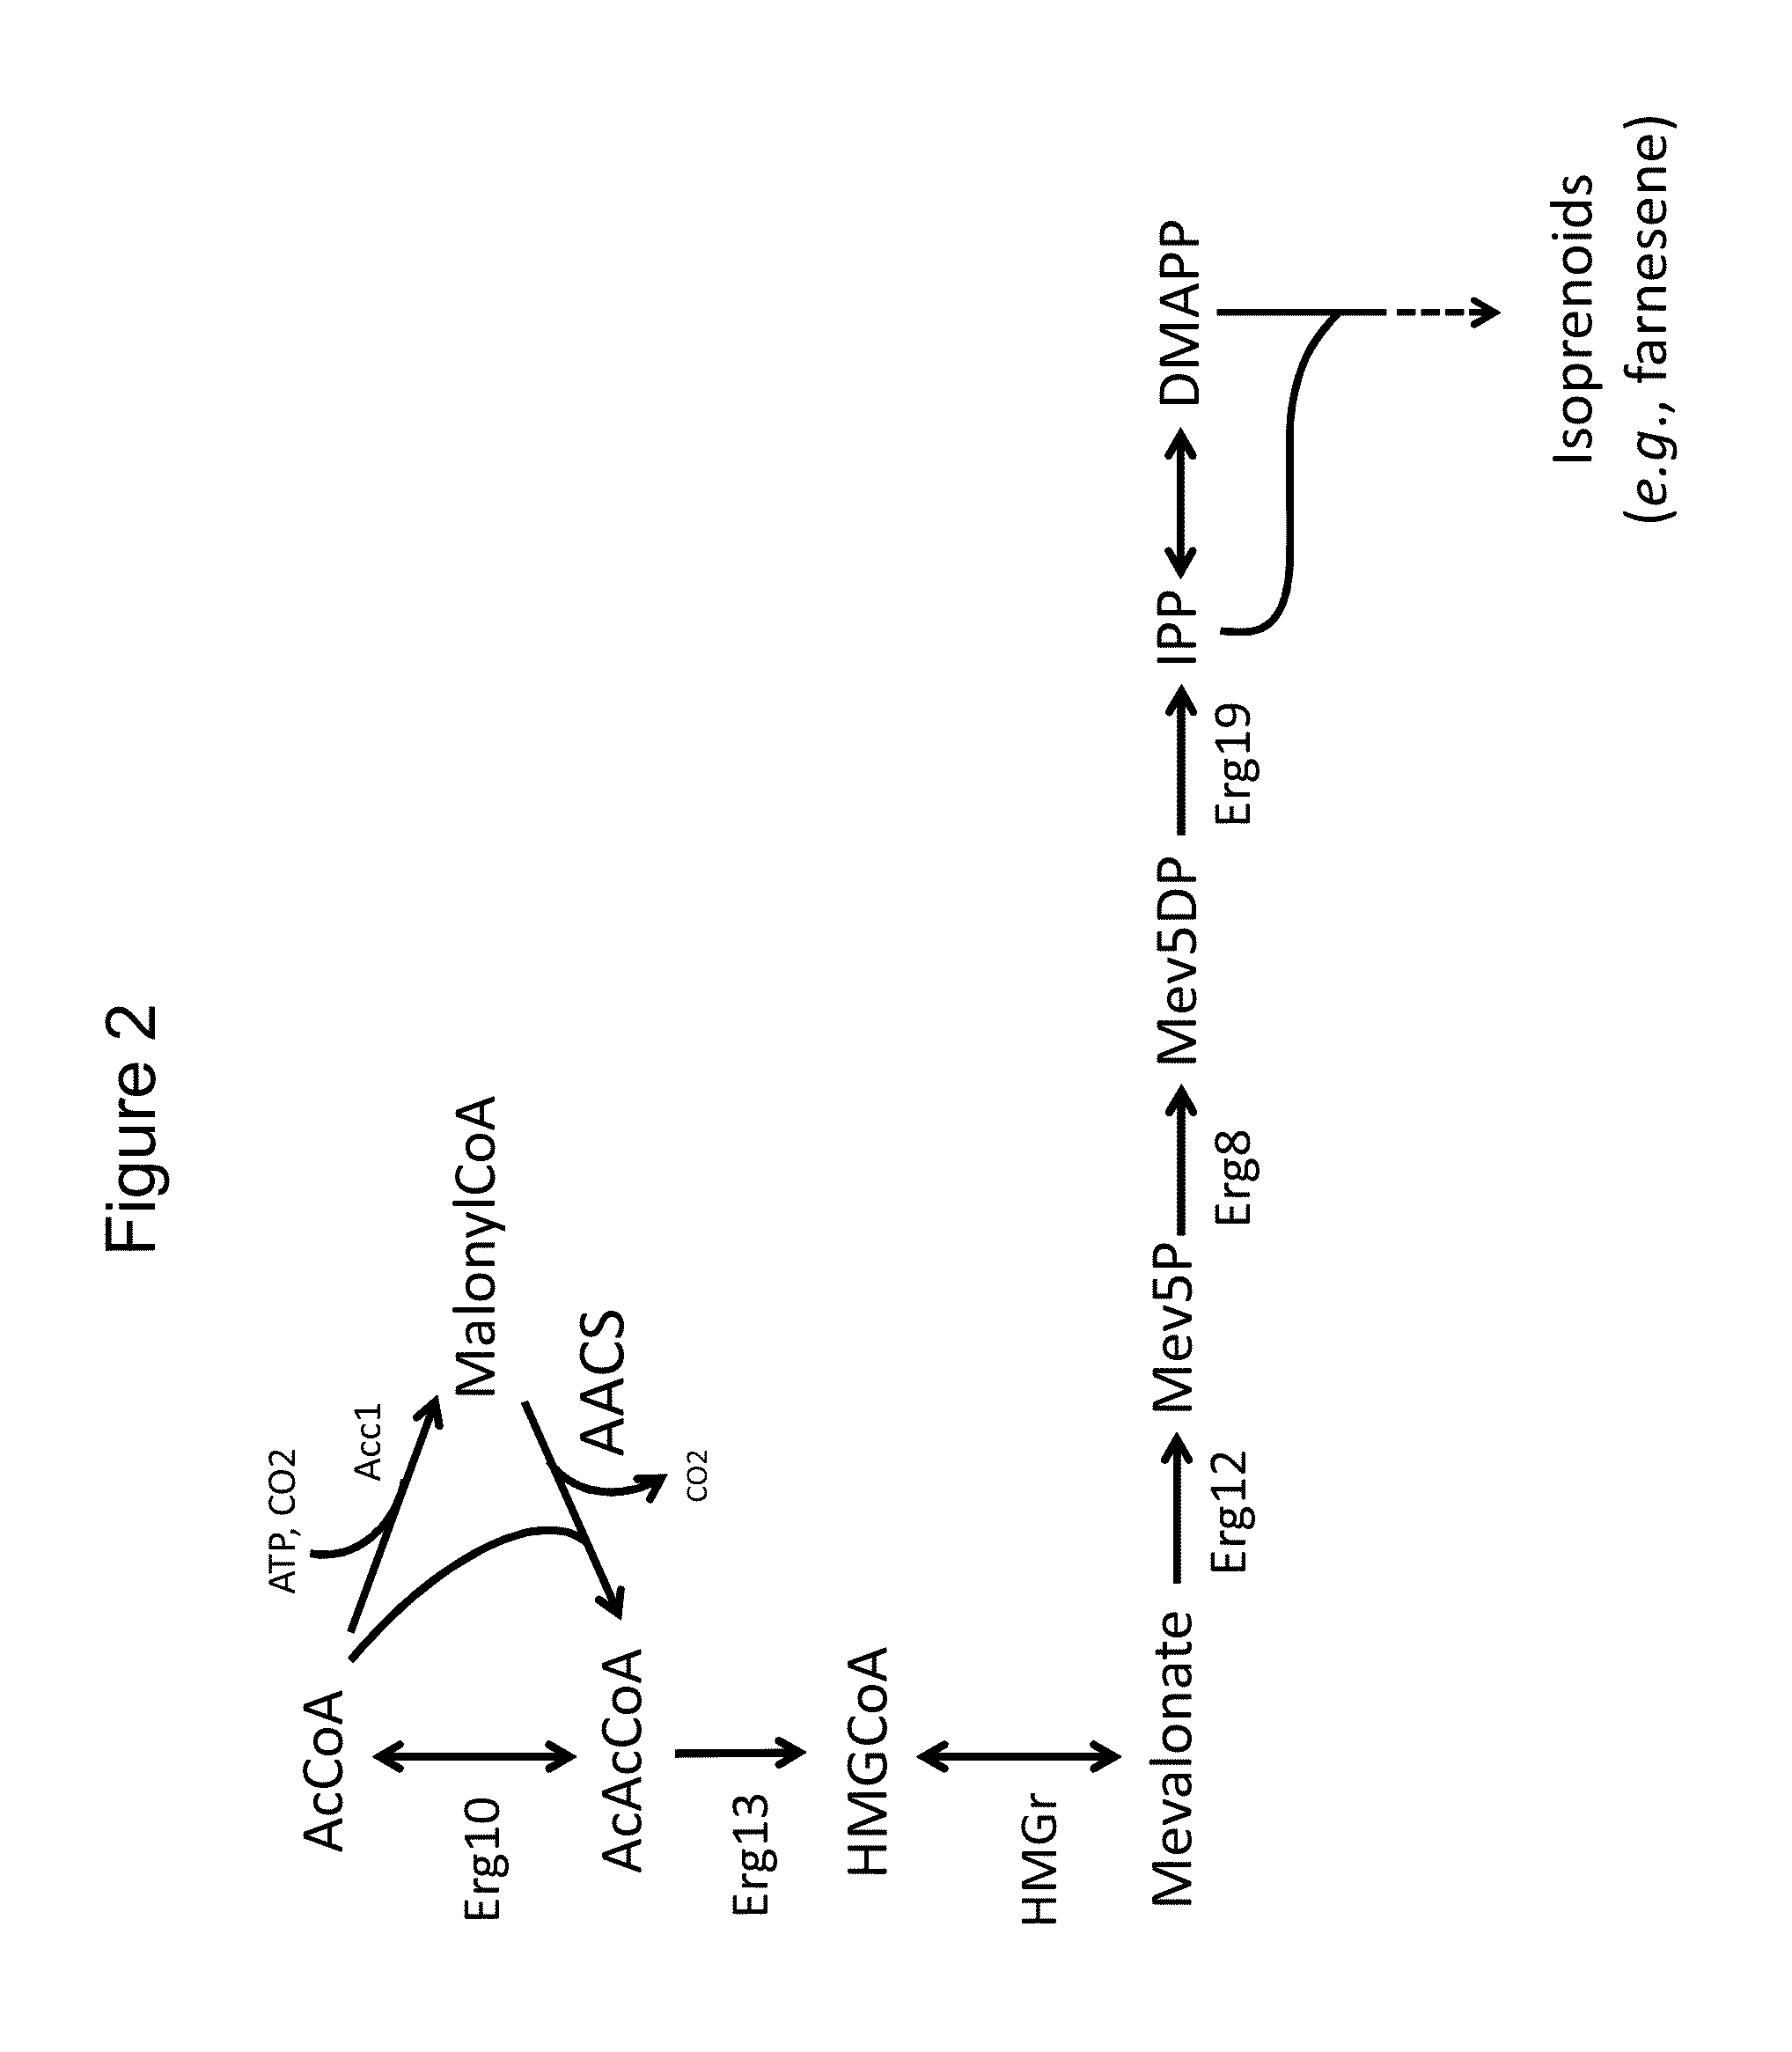 Use of phosphoketolase and phosphotransacetylase for production of acetyl-coenzyme a derived compounds